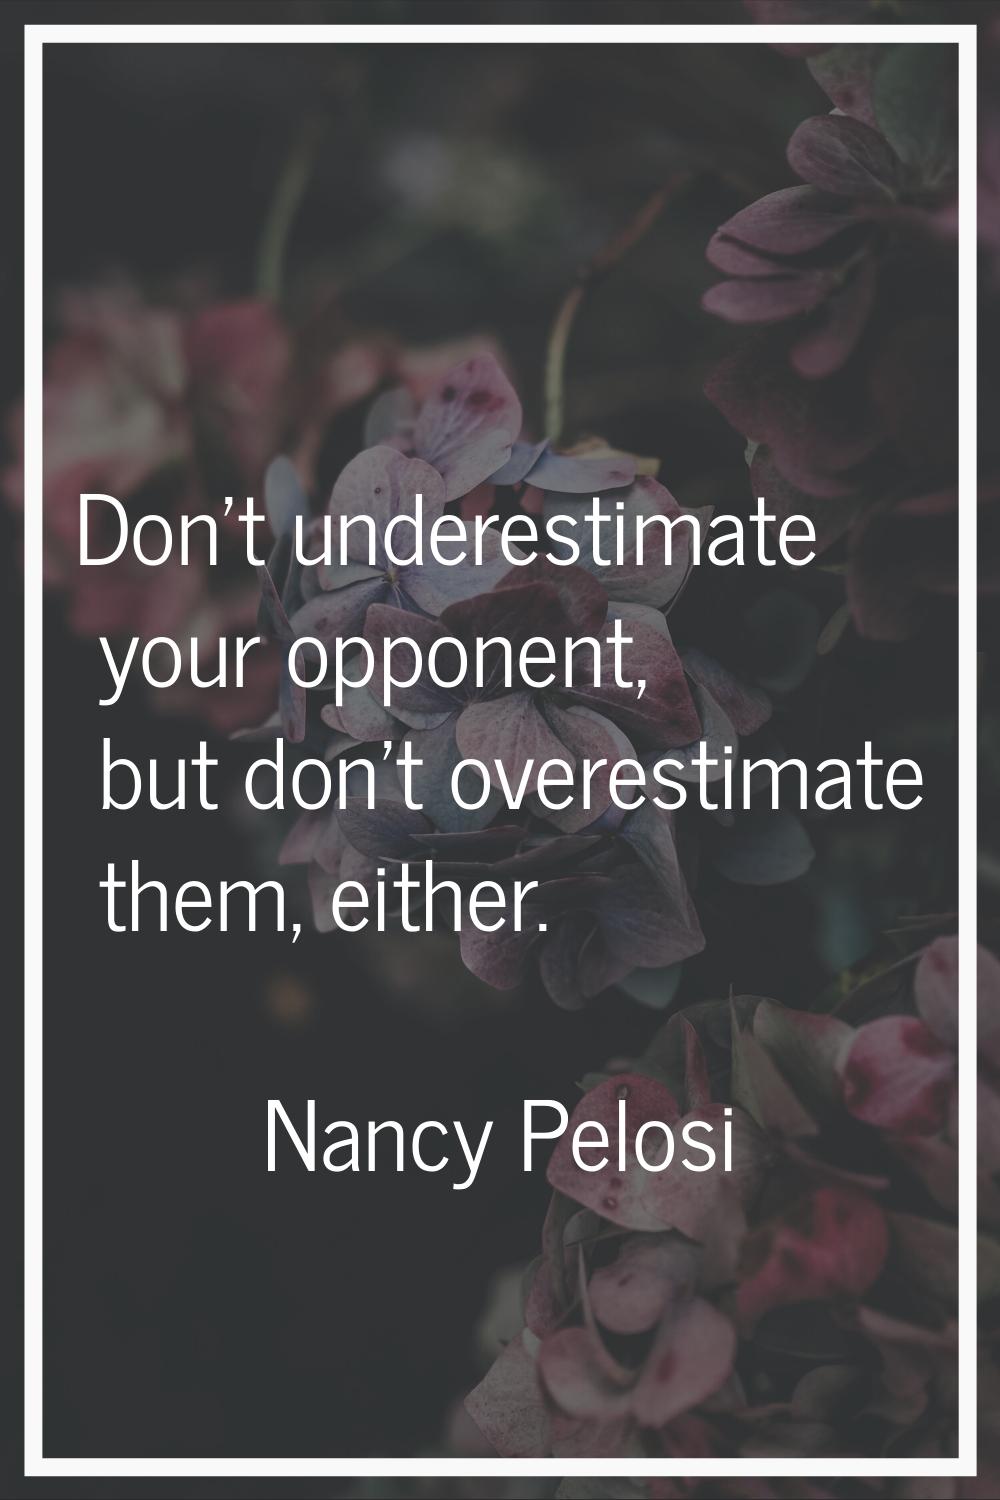 Don't underestimate your opponent, but don't overestimate them, either.